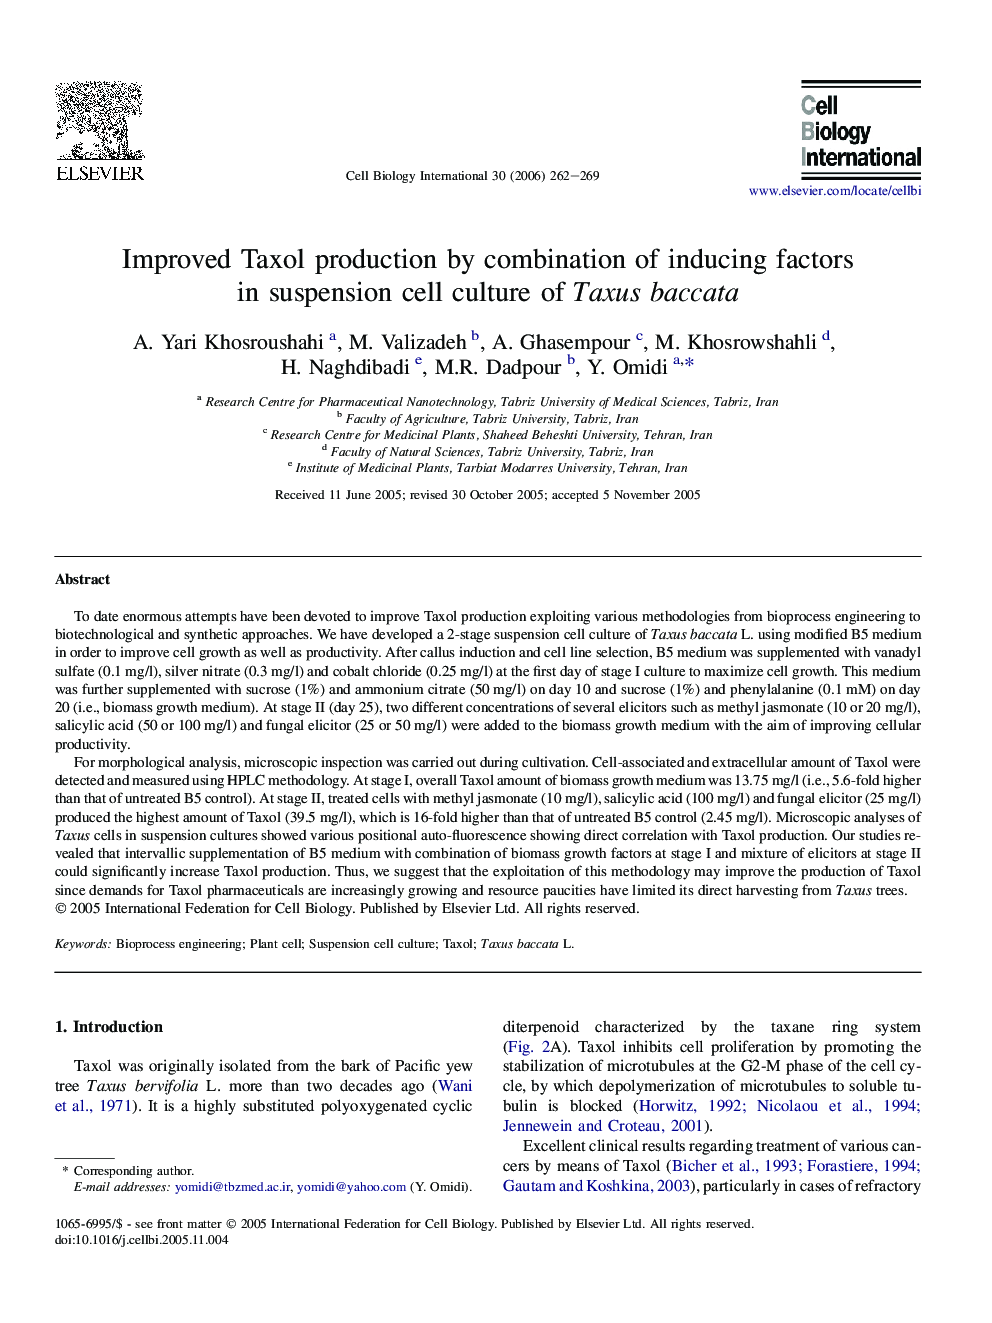 Improved Taxol production by combination of inducing factors in suspension cell culture of Taxus baccata